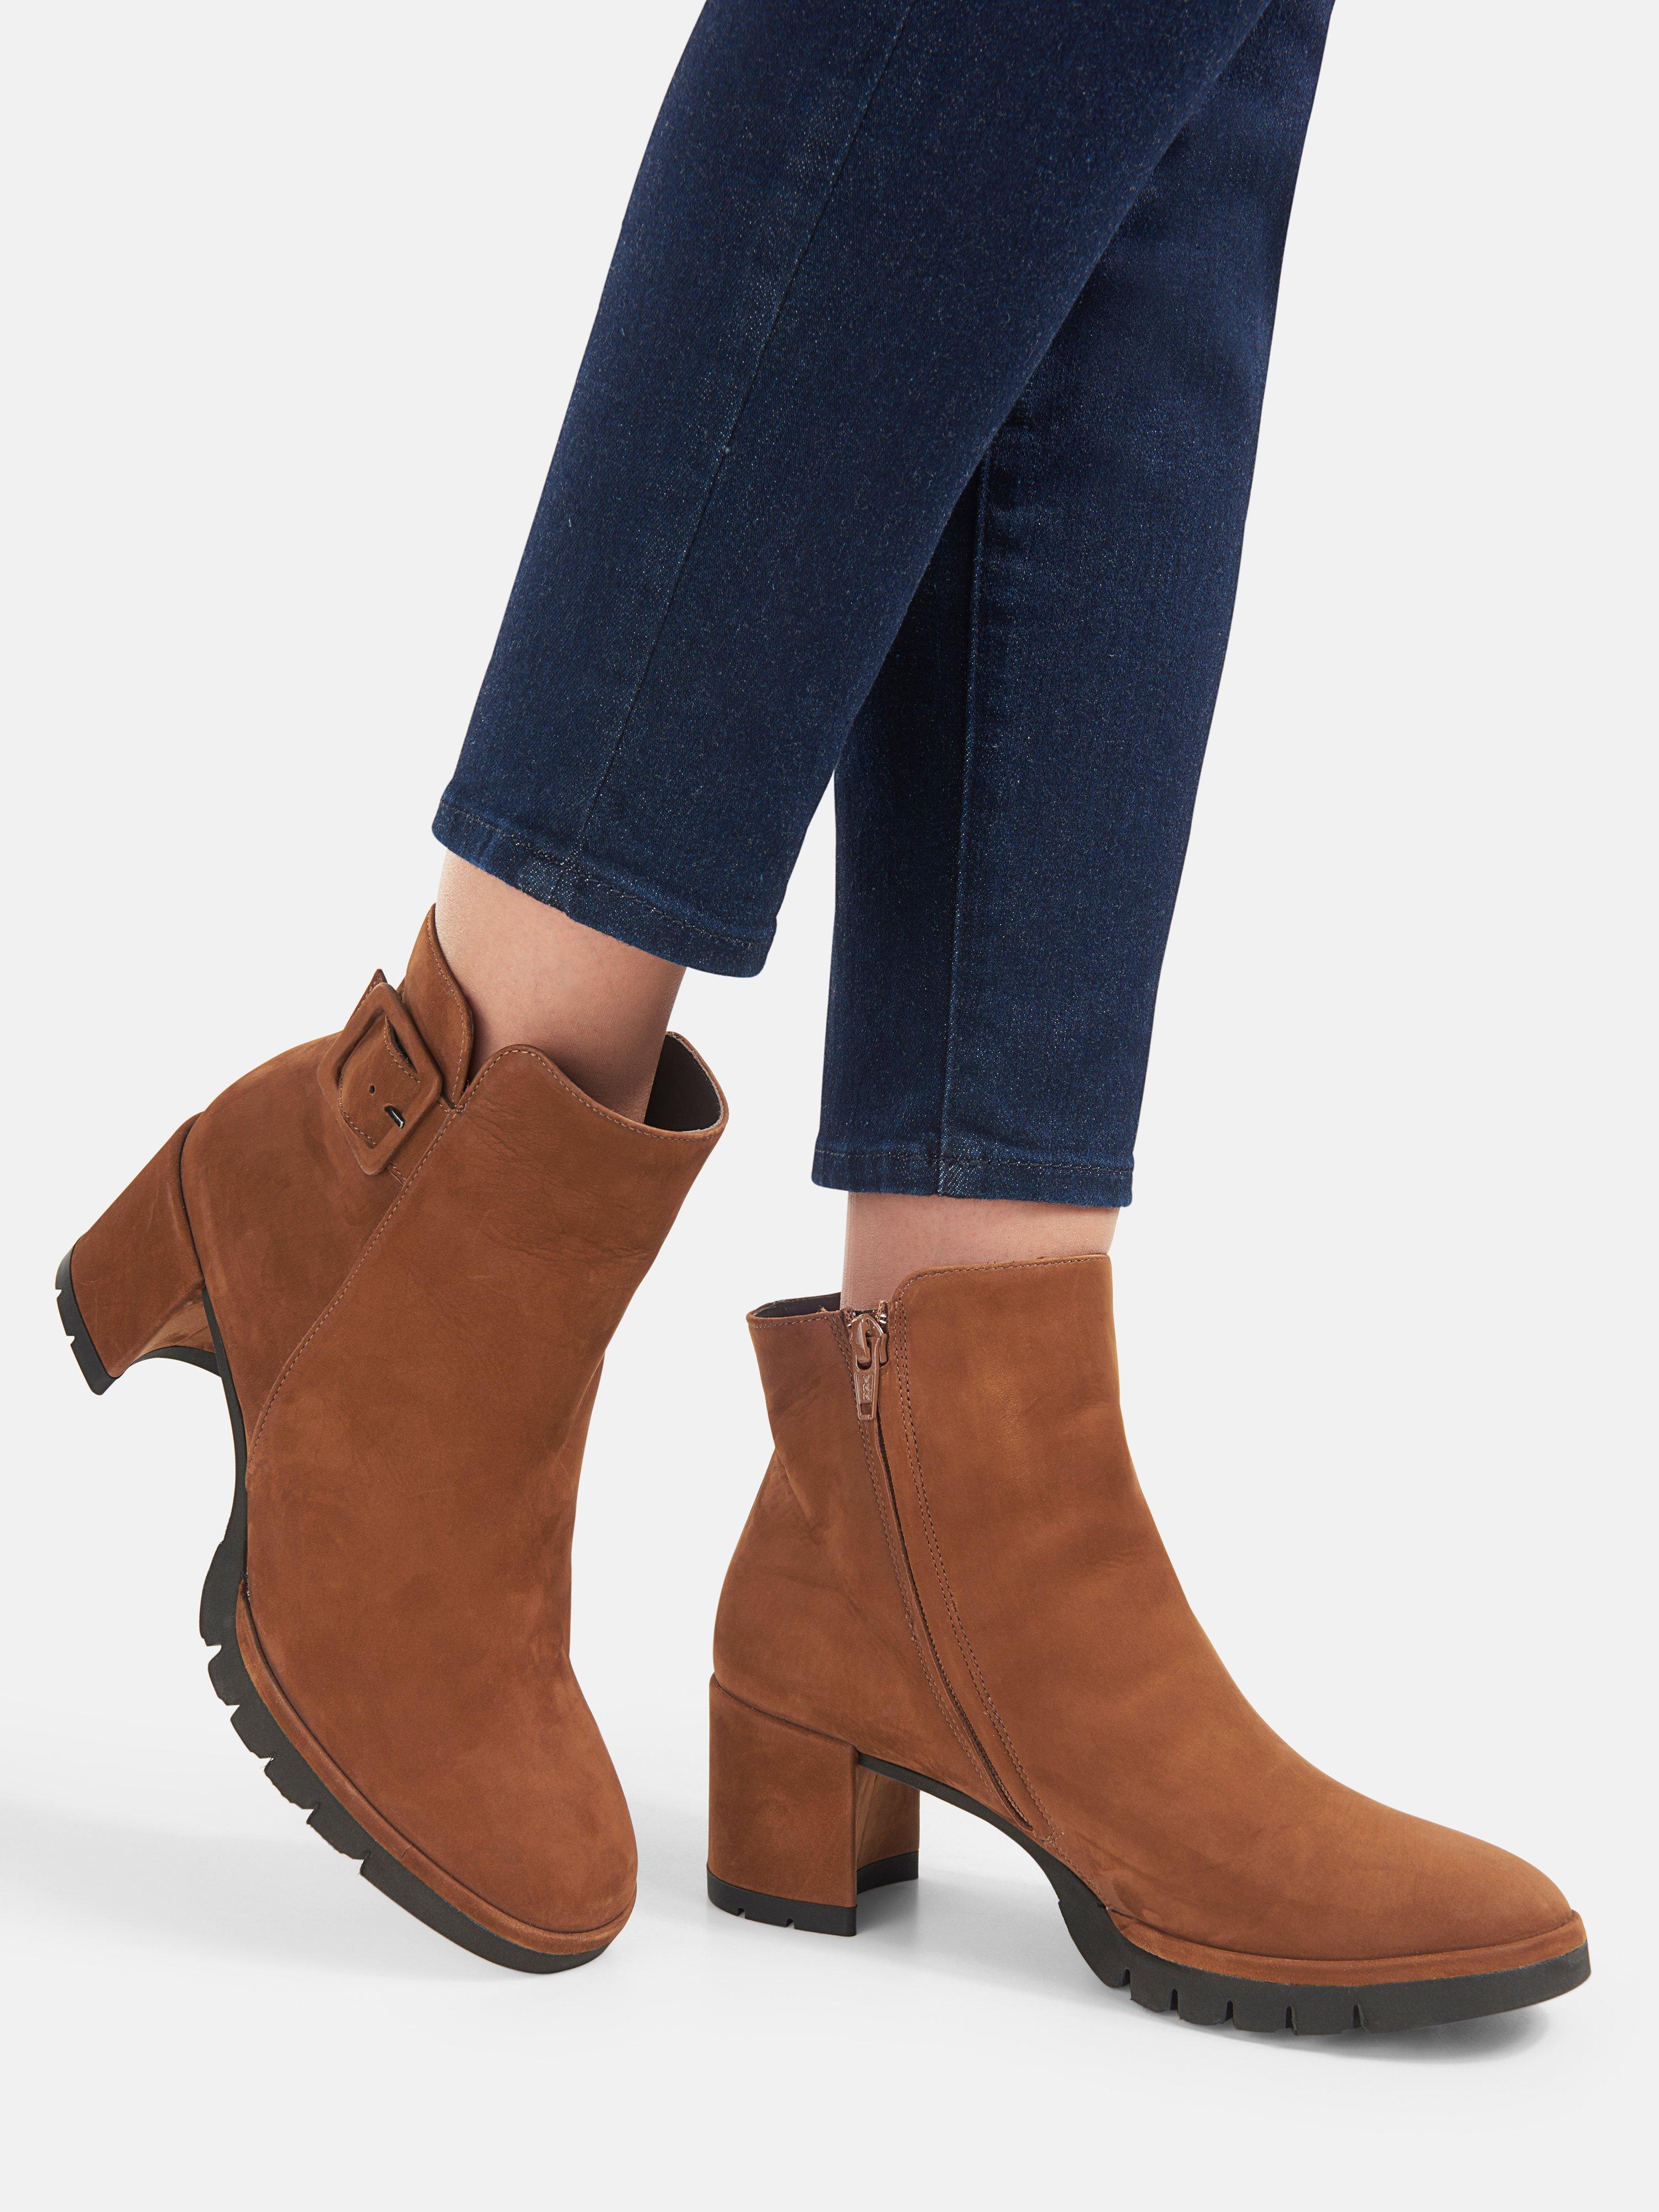 Paul Green Platform Ankle Boots Made Of Nubuck Leather Chestnut